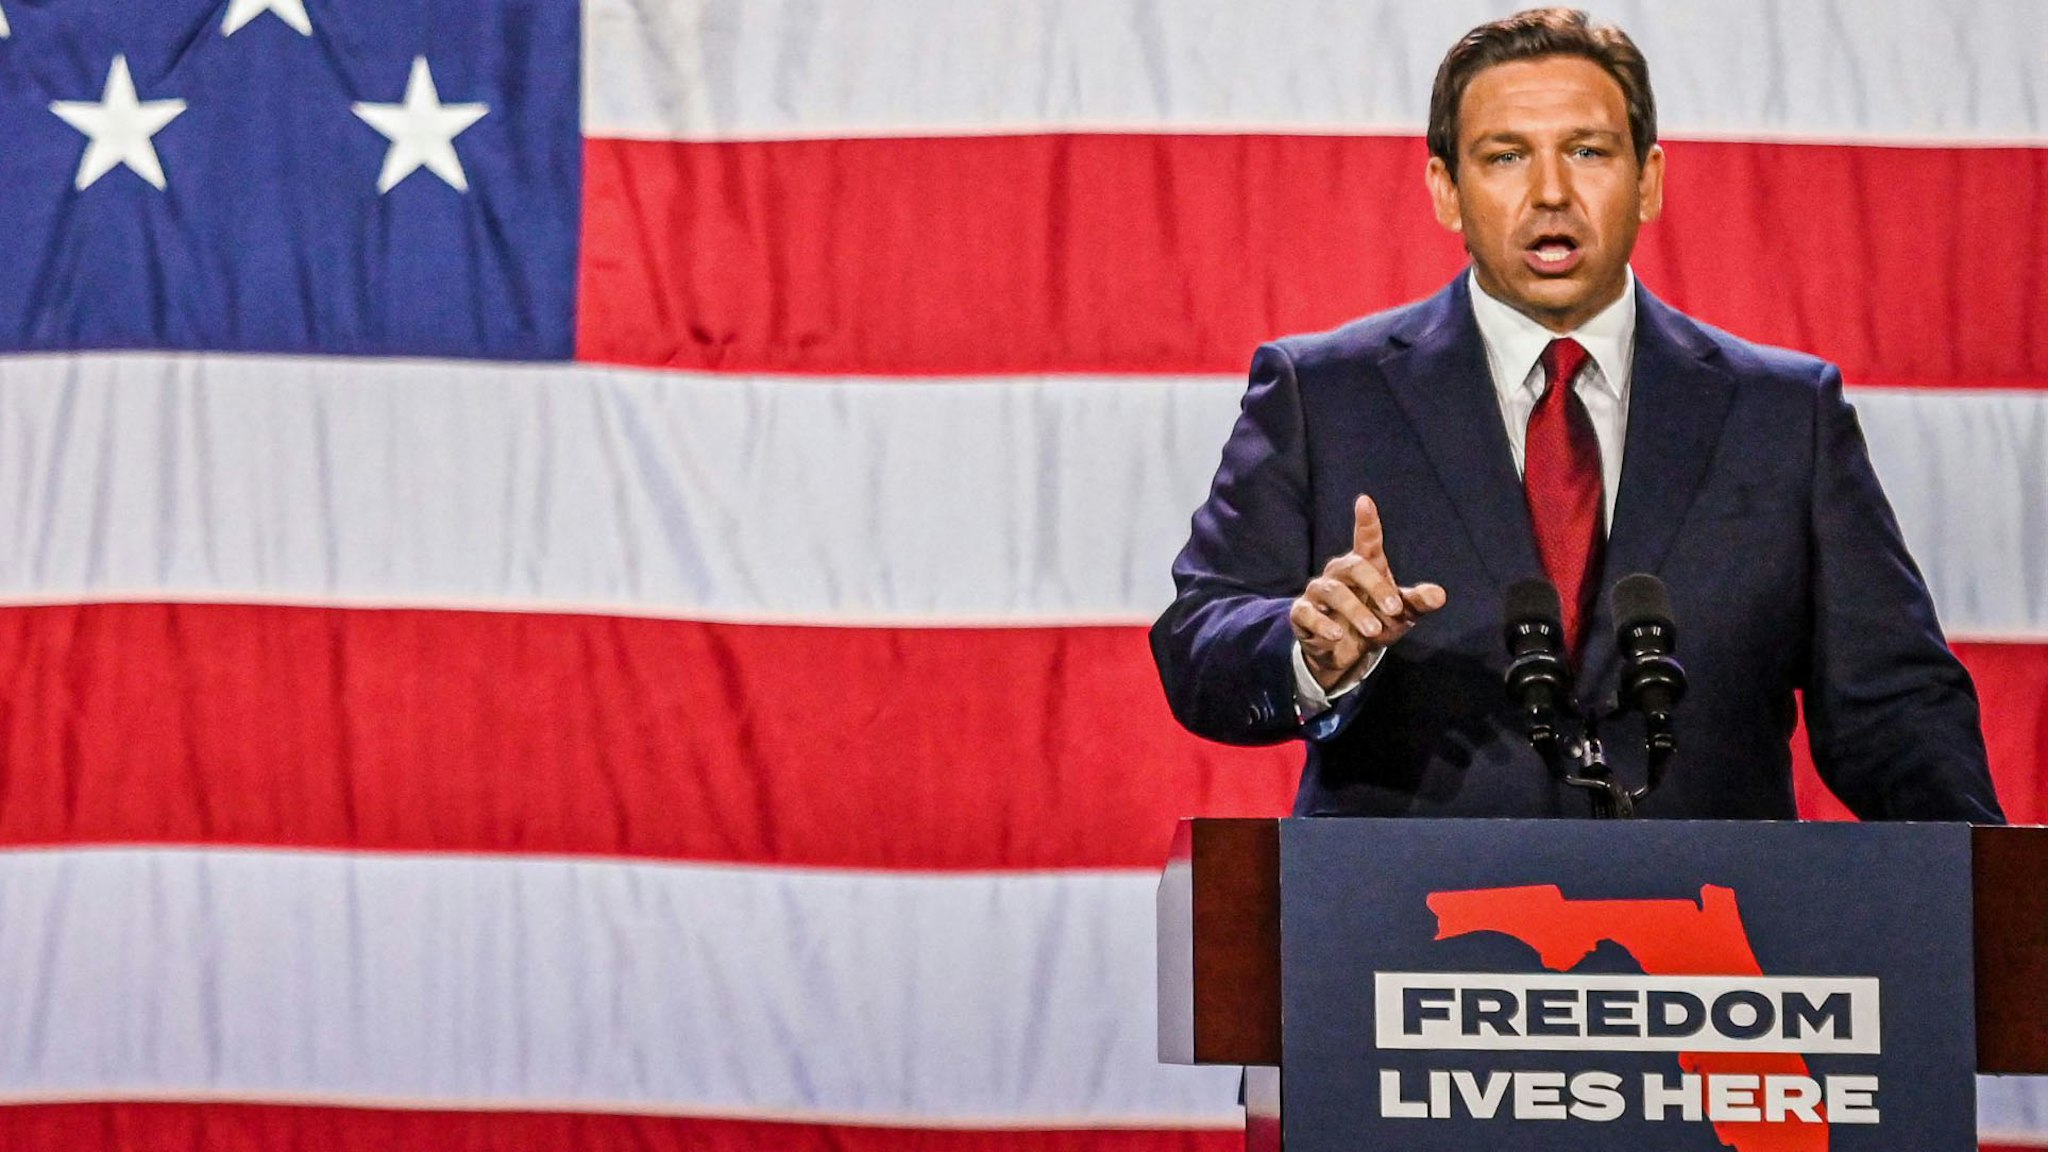 TOPSHOT - Republican gubernatorial candidate for Florida Ron DeSantis speaks during an election night watch party at the Convention Center in Tampa, Florida, on November 8, 2022. - Florida Governor Ron DeSantis, who has been tipped as a possible 2024 presidential candidate, was projected as one of the early winners of the night in Tuesday's midterm election.